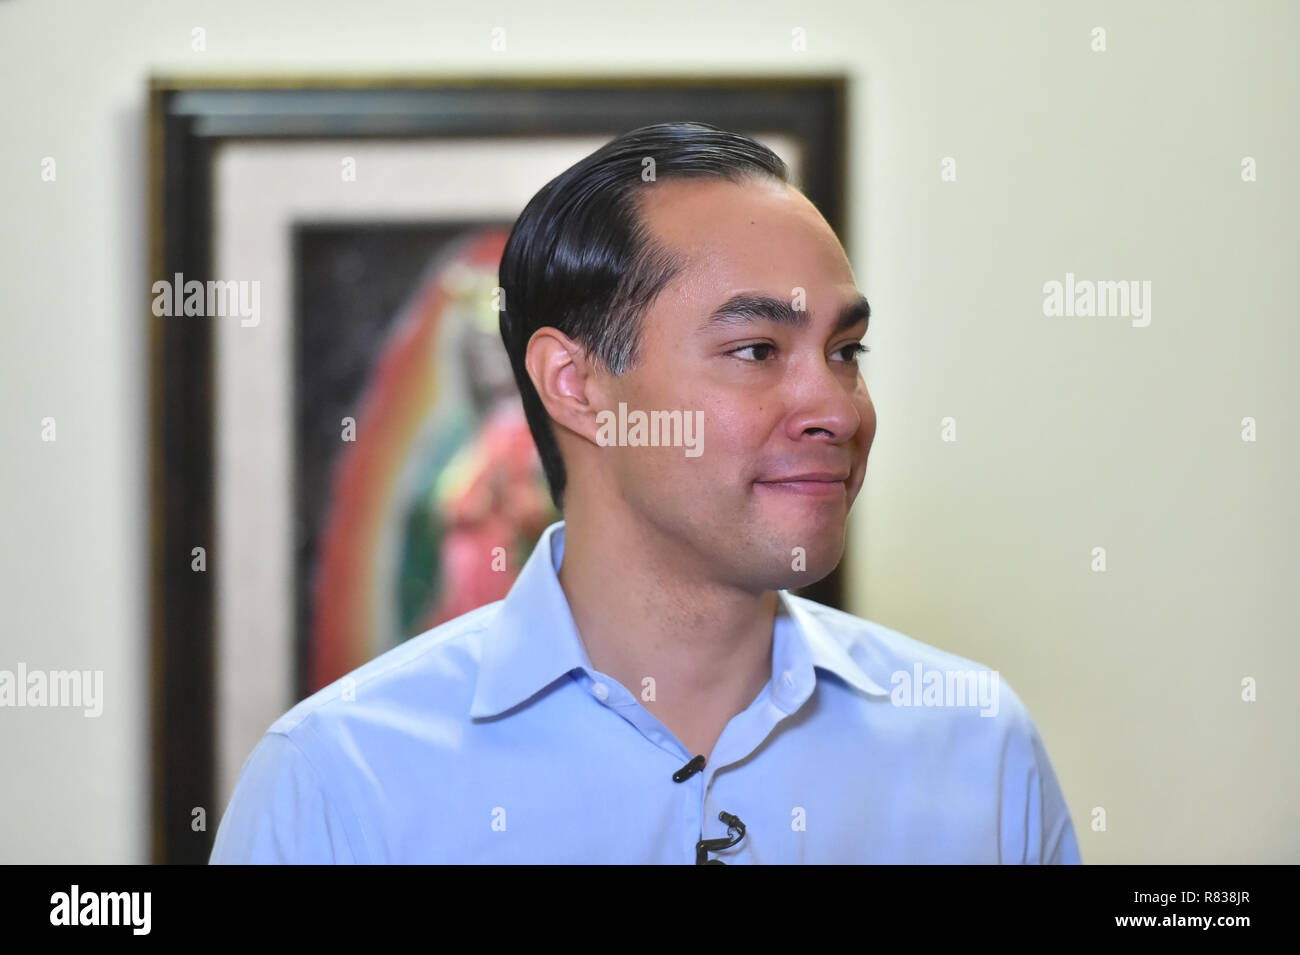 San Antonio, Texas, USA. 12th Dec 2018. Former Housing and Urban Developement Secretary and San Antonio Tx. Mayor JULIAN CASTRO announces Dec 12 that he has formed an exploratory committee toward a 2020 presidential campaign. Castro made the announxement in the dining room of his San Antonio home. Credit: Robin Jerstad/Alamy Live News Stock Photo